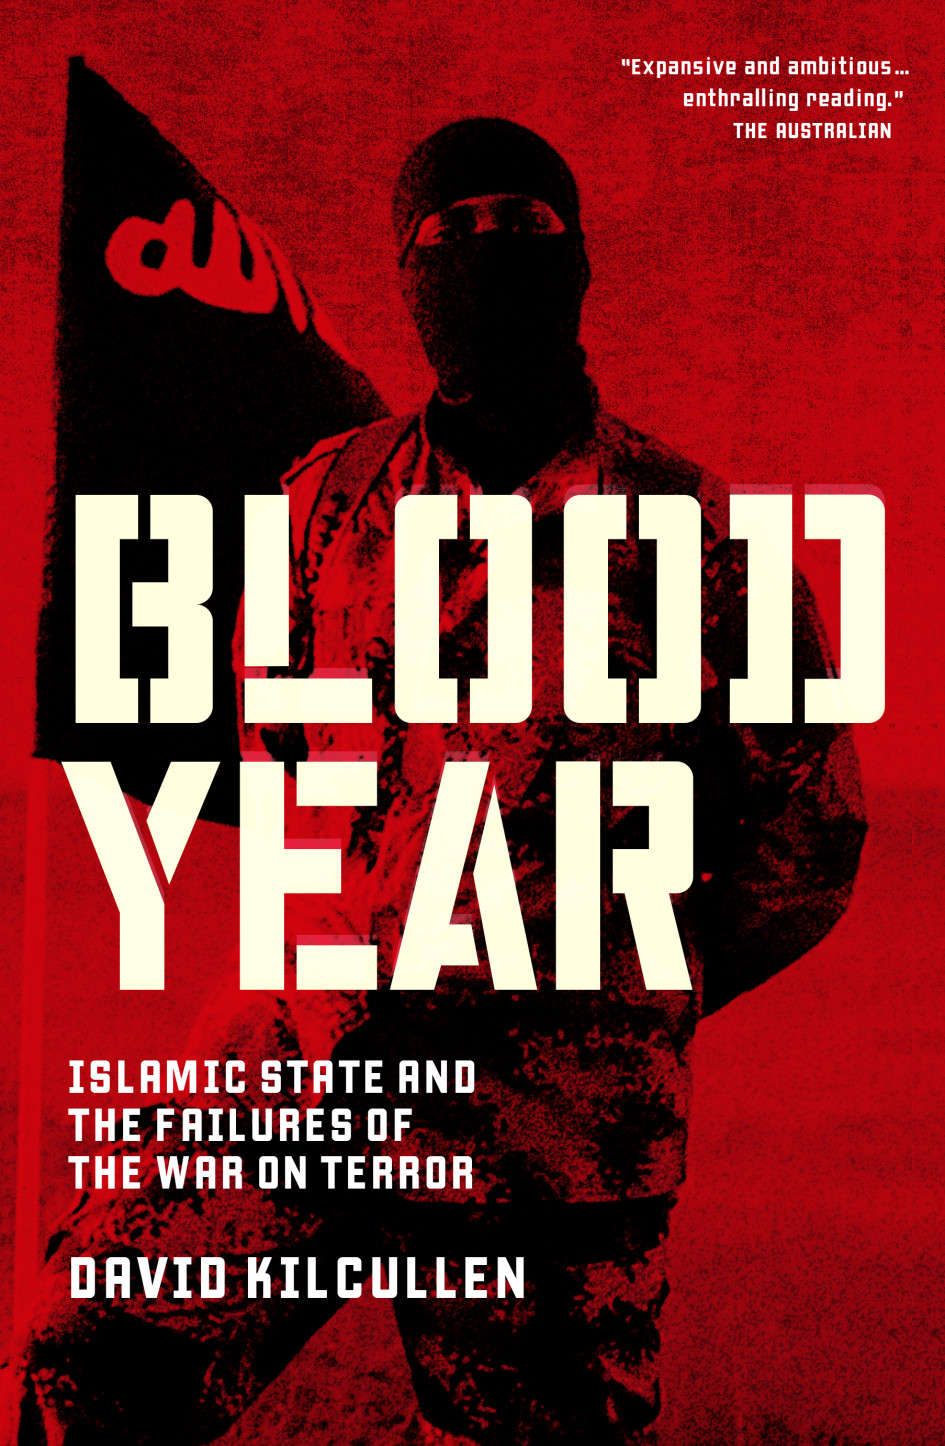 Blood Year: The Failures of the War on Terror